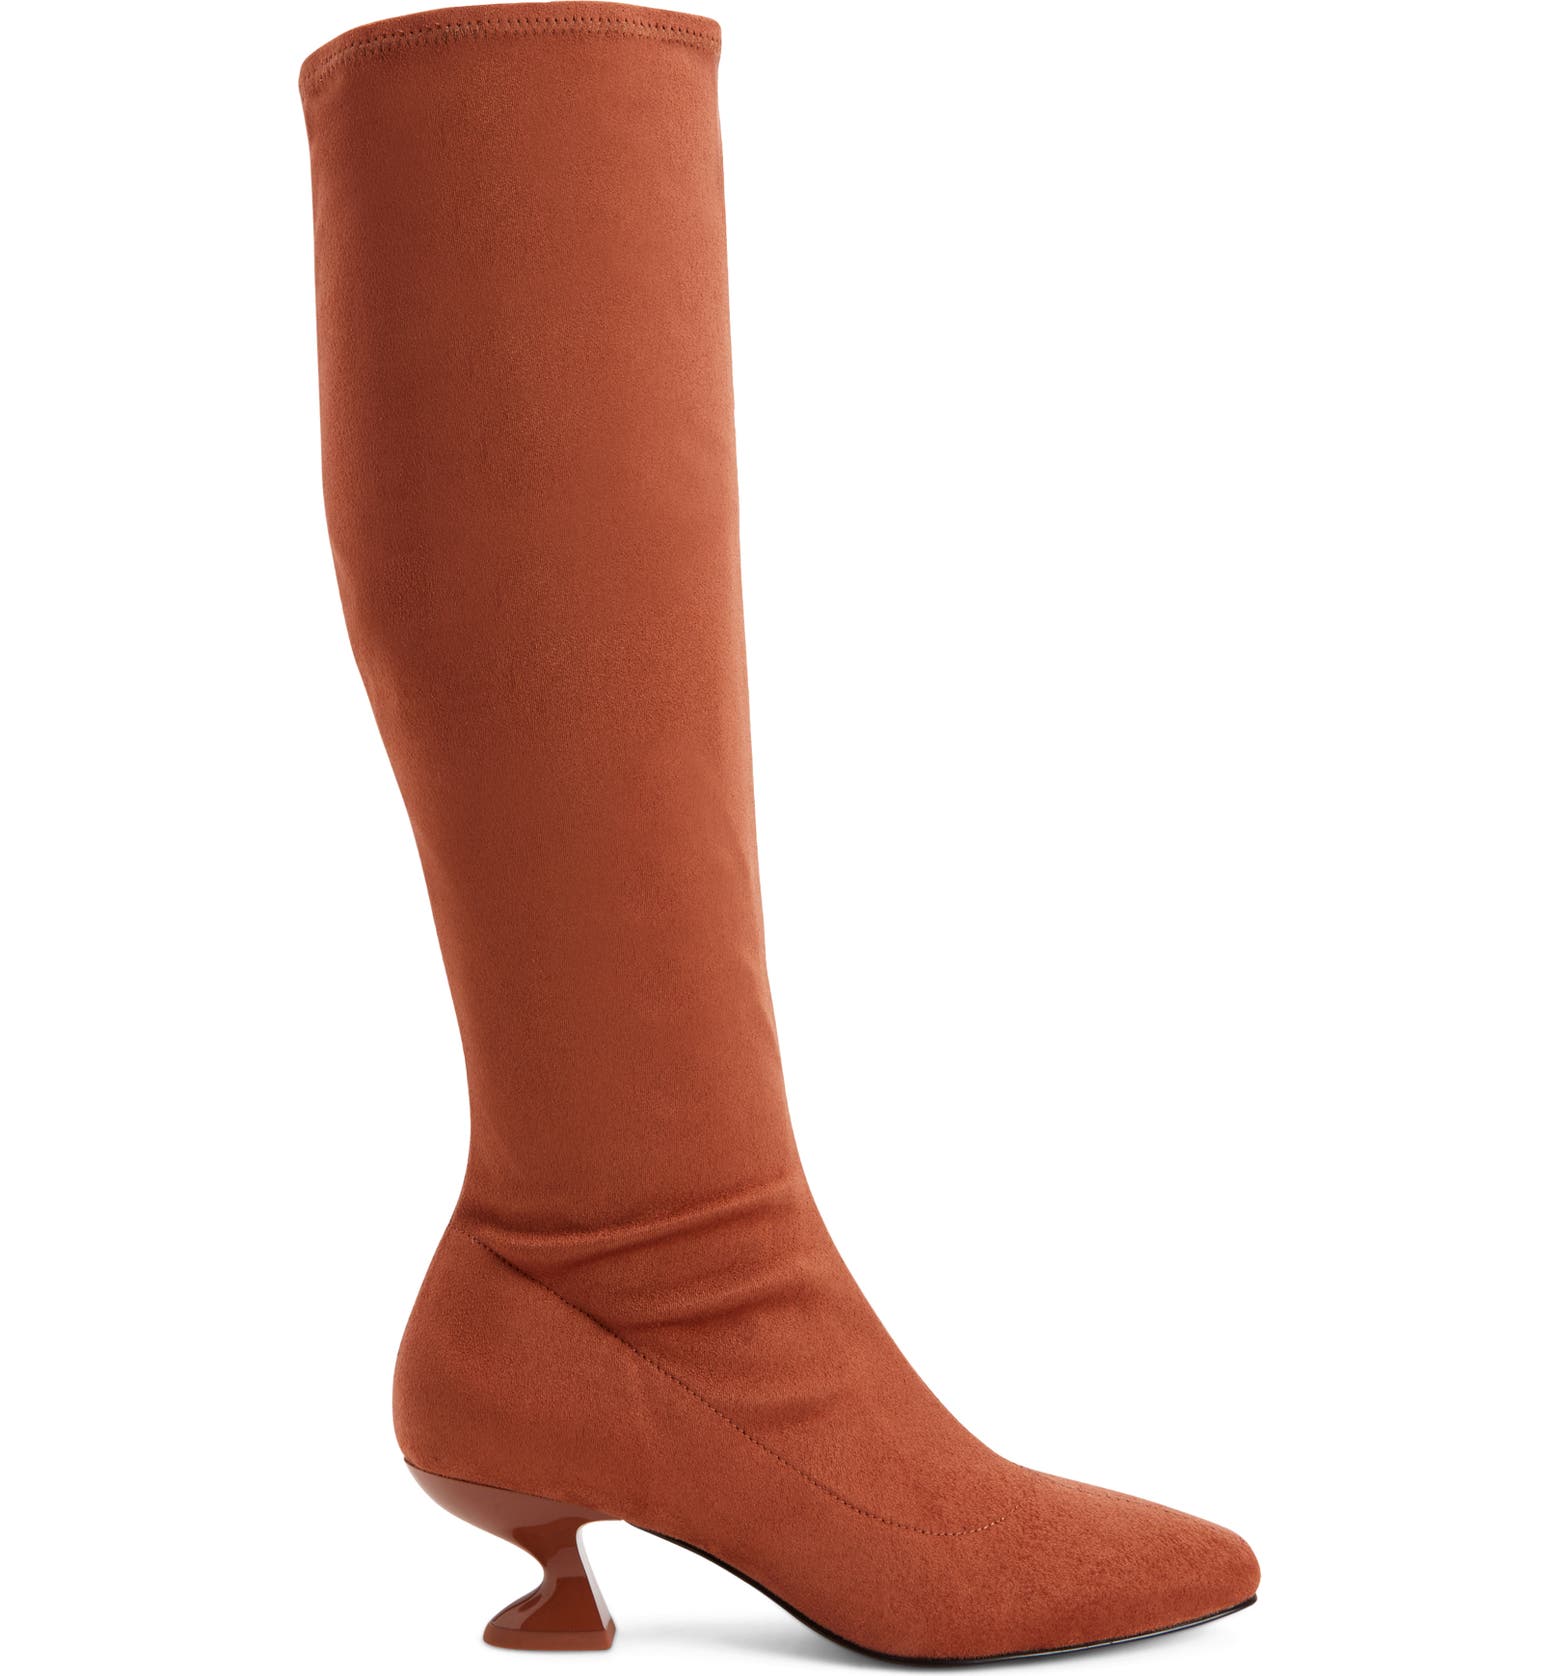 Katy Perry The Laterr Knee High Boot (Women) | Nordstrom